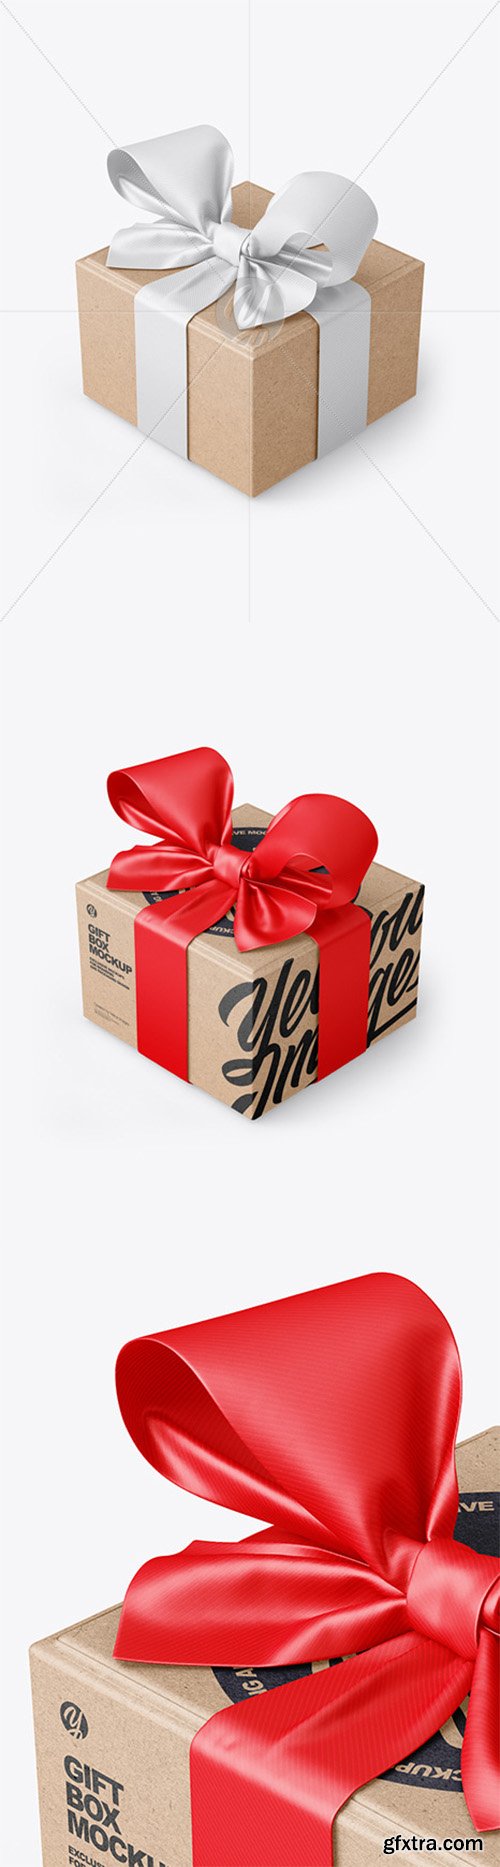 Kraft Paper Gift Box With Tied Bow Mockup 79780